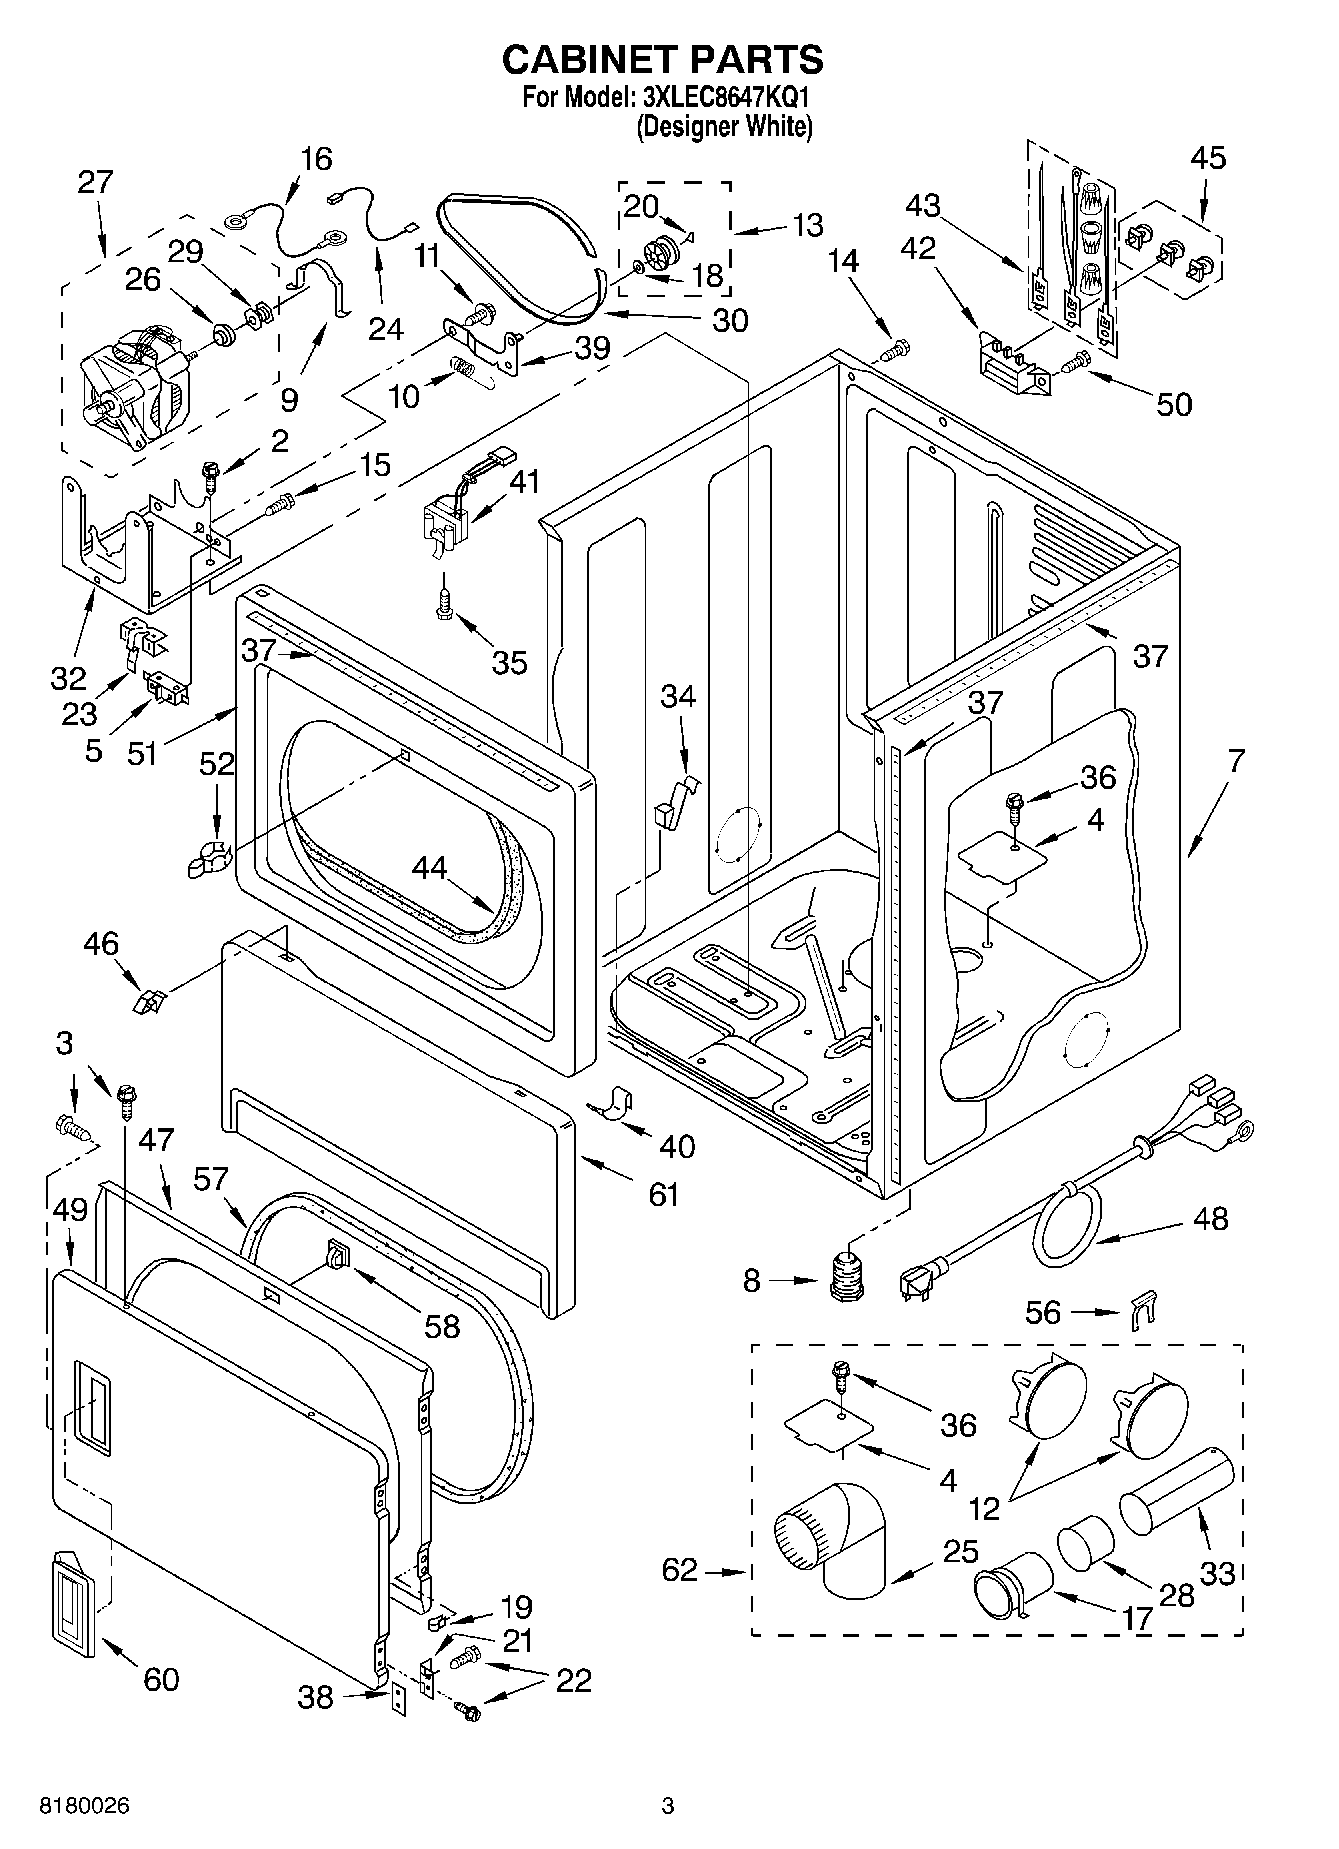 02 - CABINET PARTS - OPTIONAL PARTS (NOT INCLUDED)